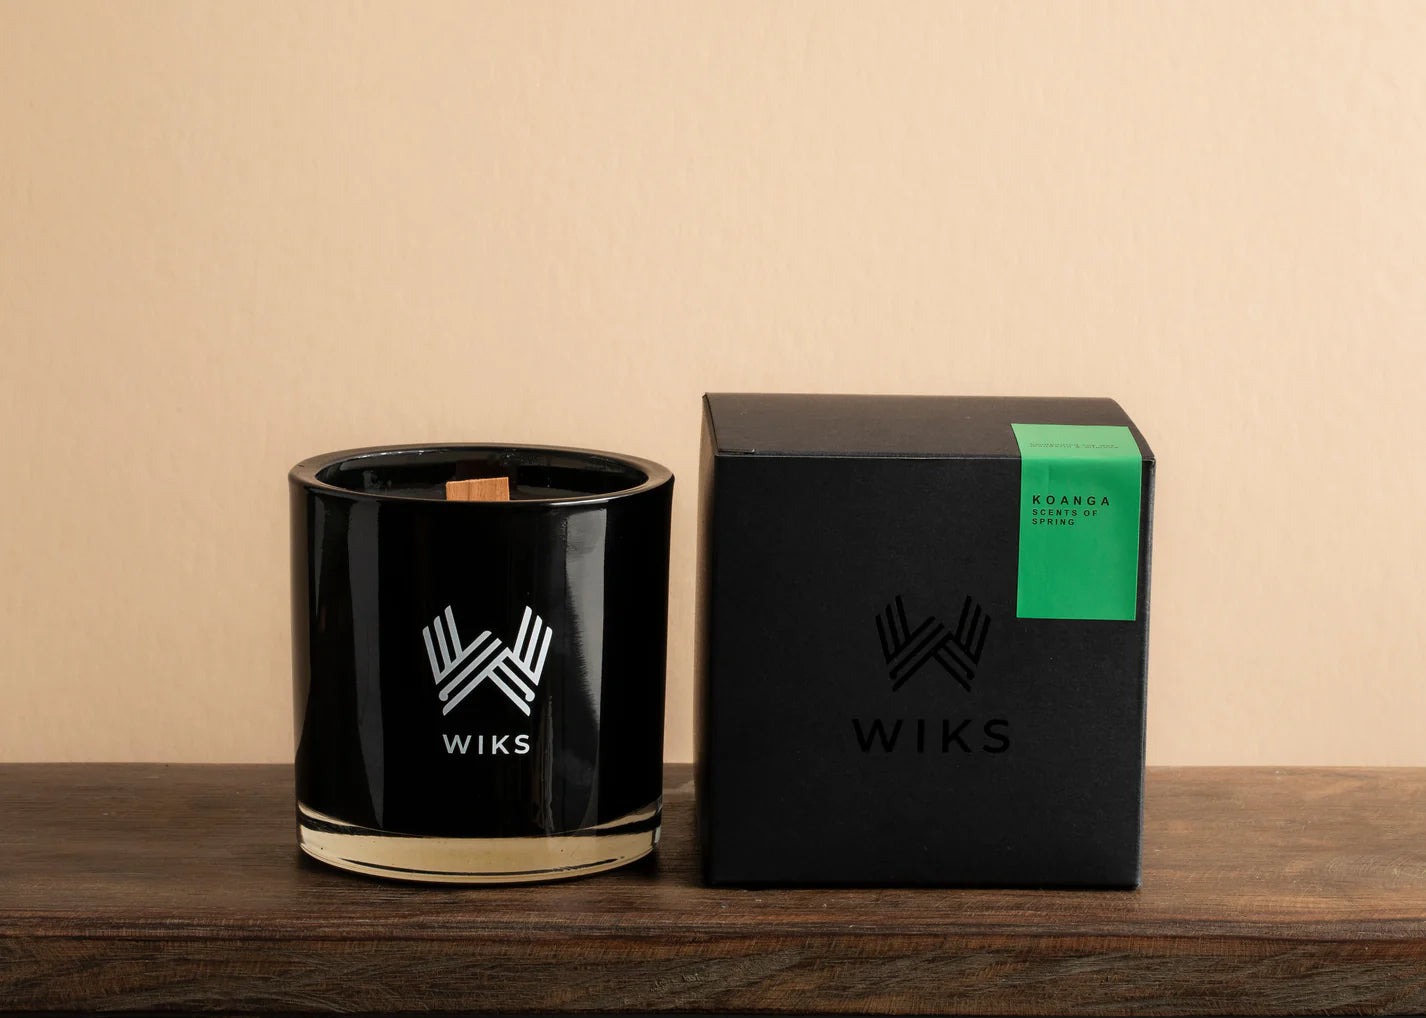 Candle (WIKS) - Koanga - Scents of Spring